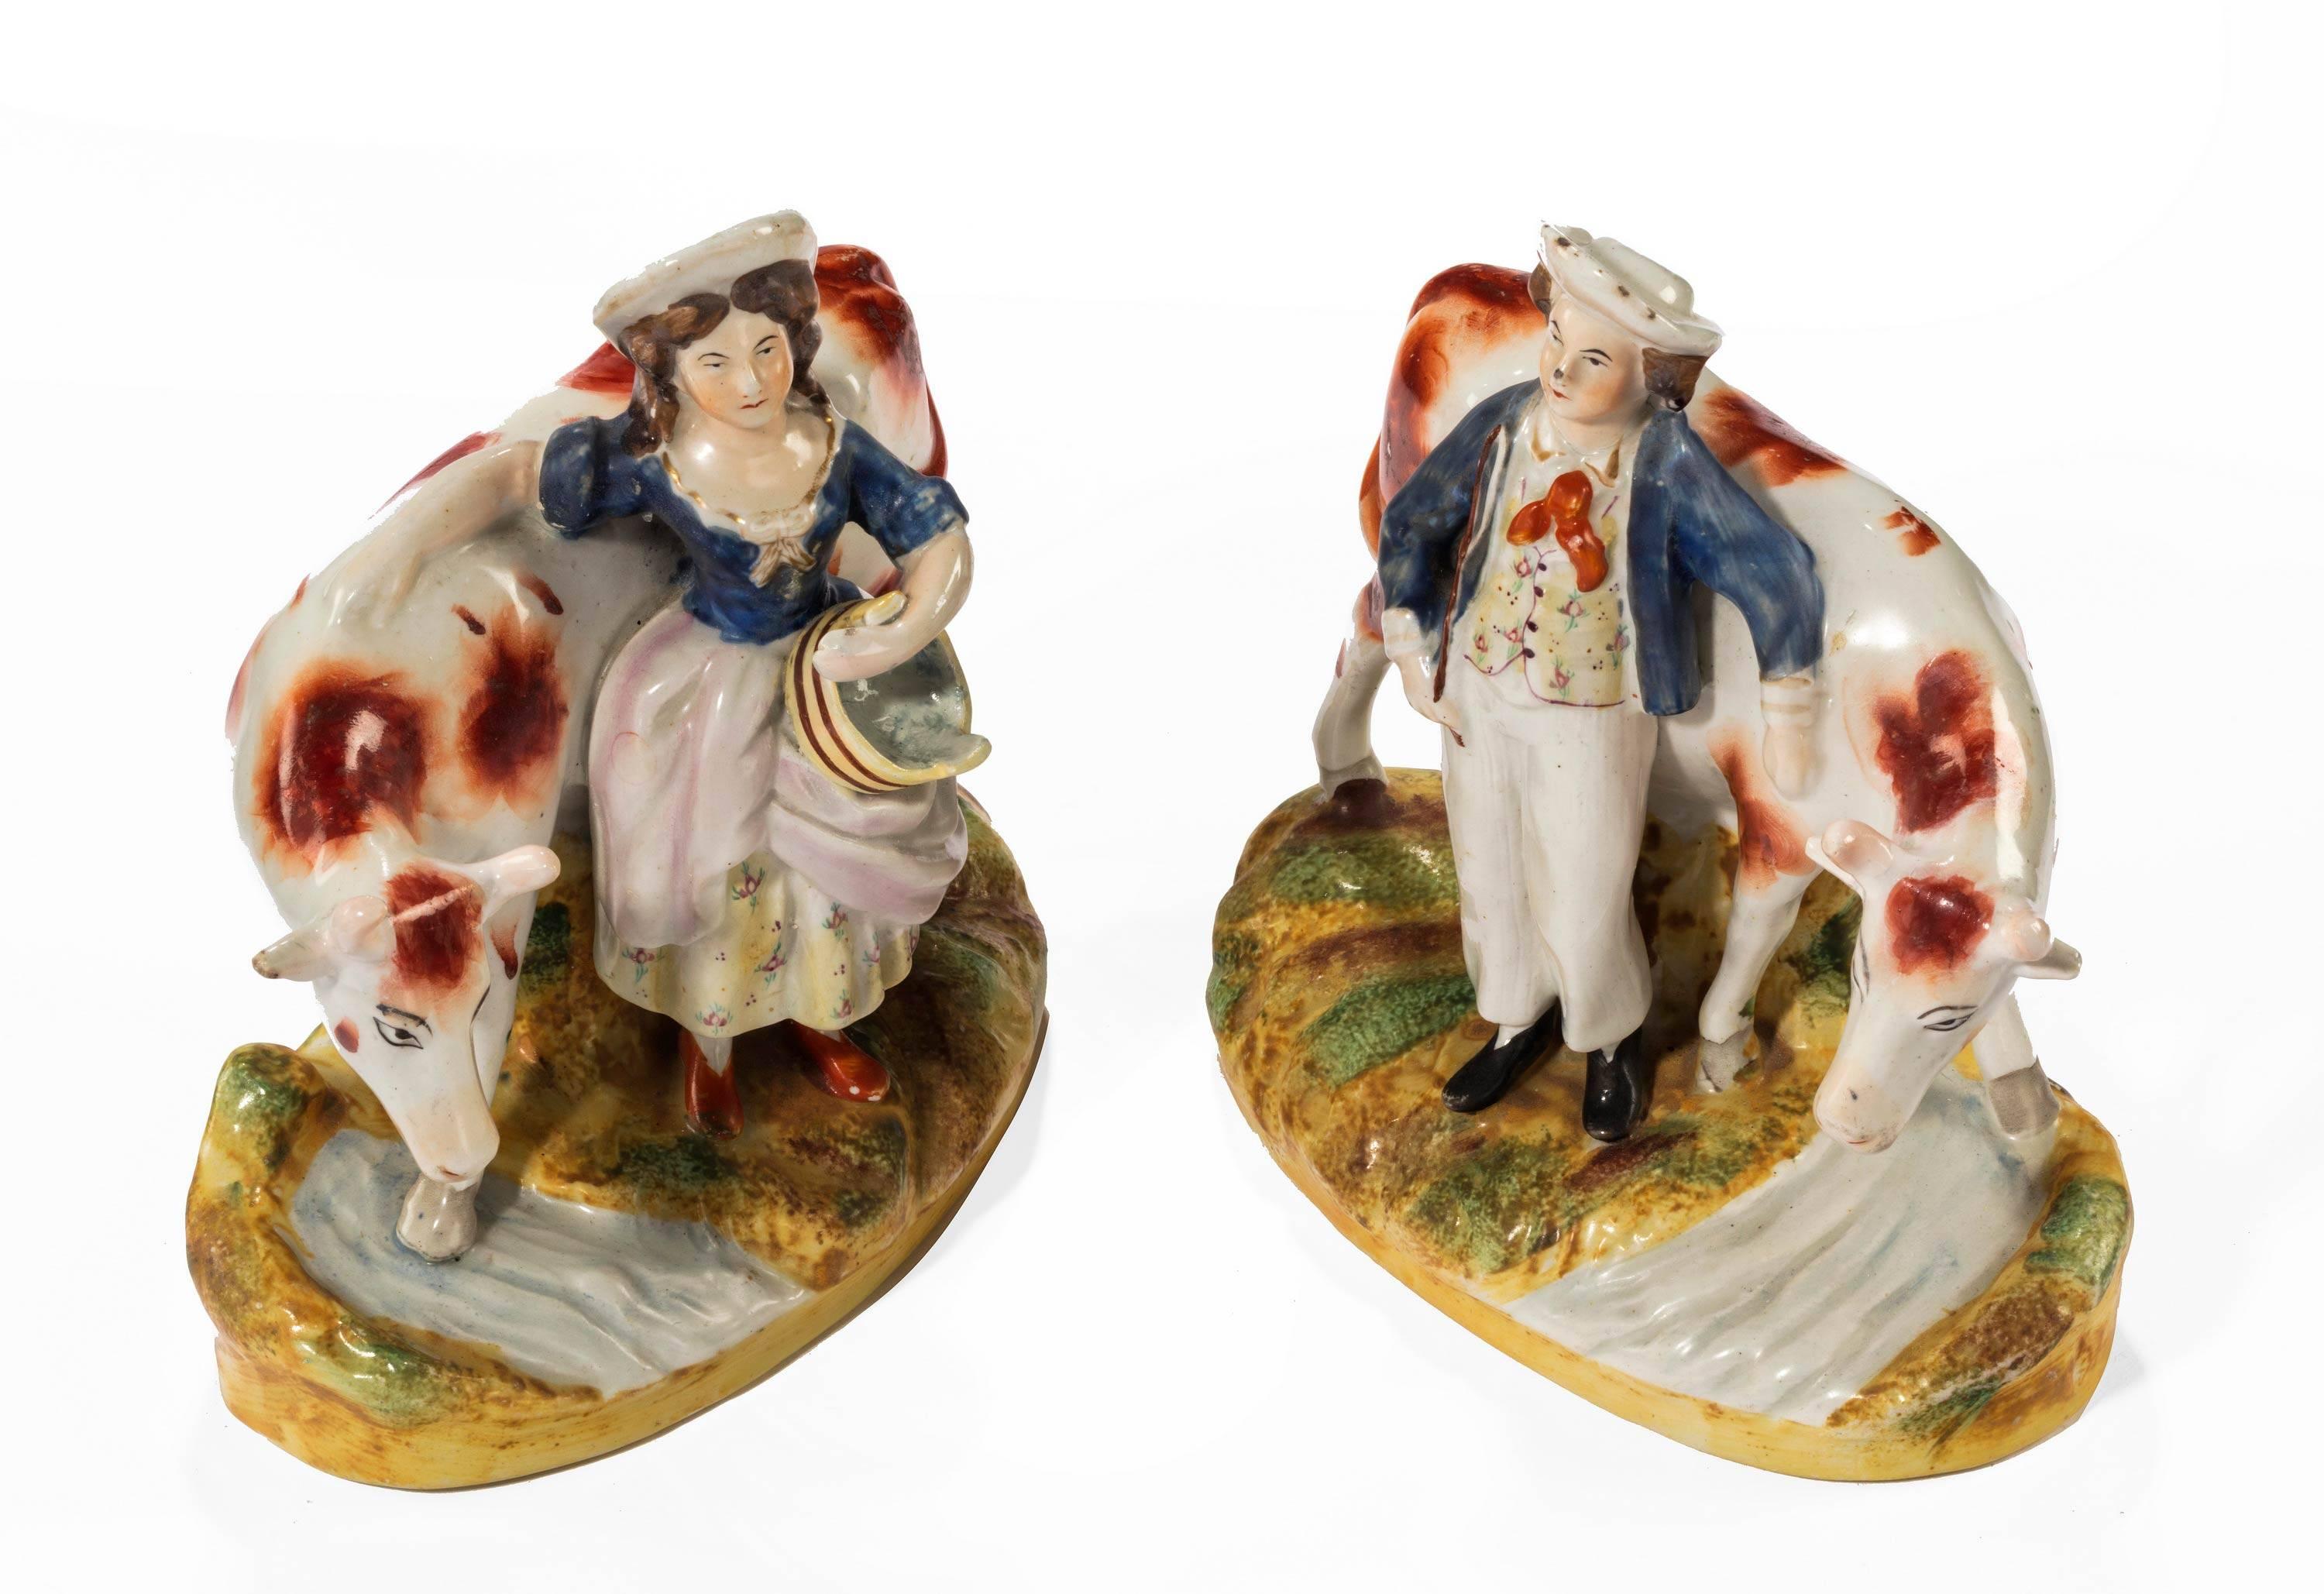 A pair of typical Staffordshire farm yard figures of a male and female with cows. Good overall condition with good enameling.